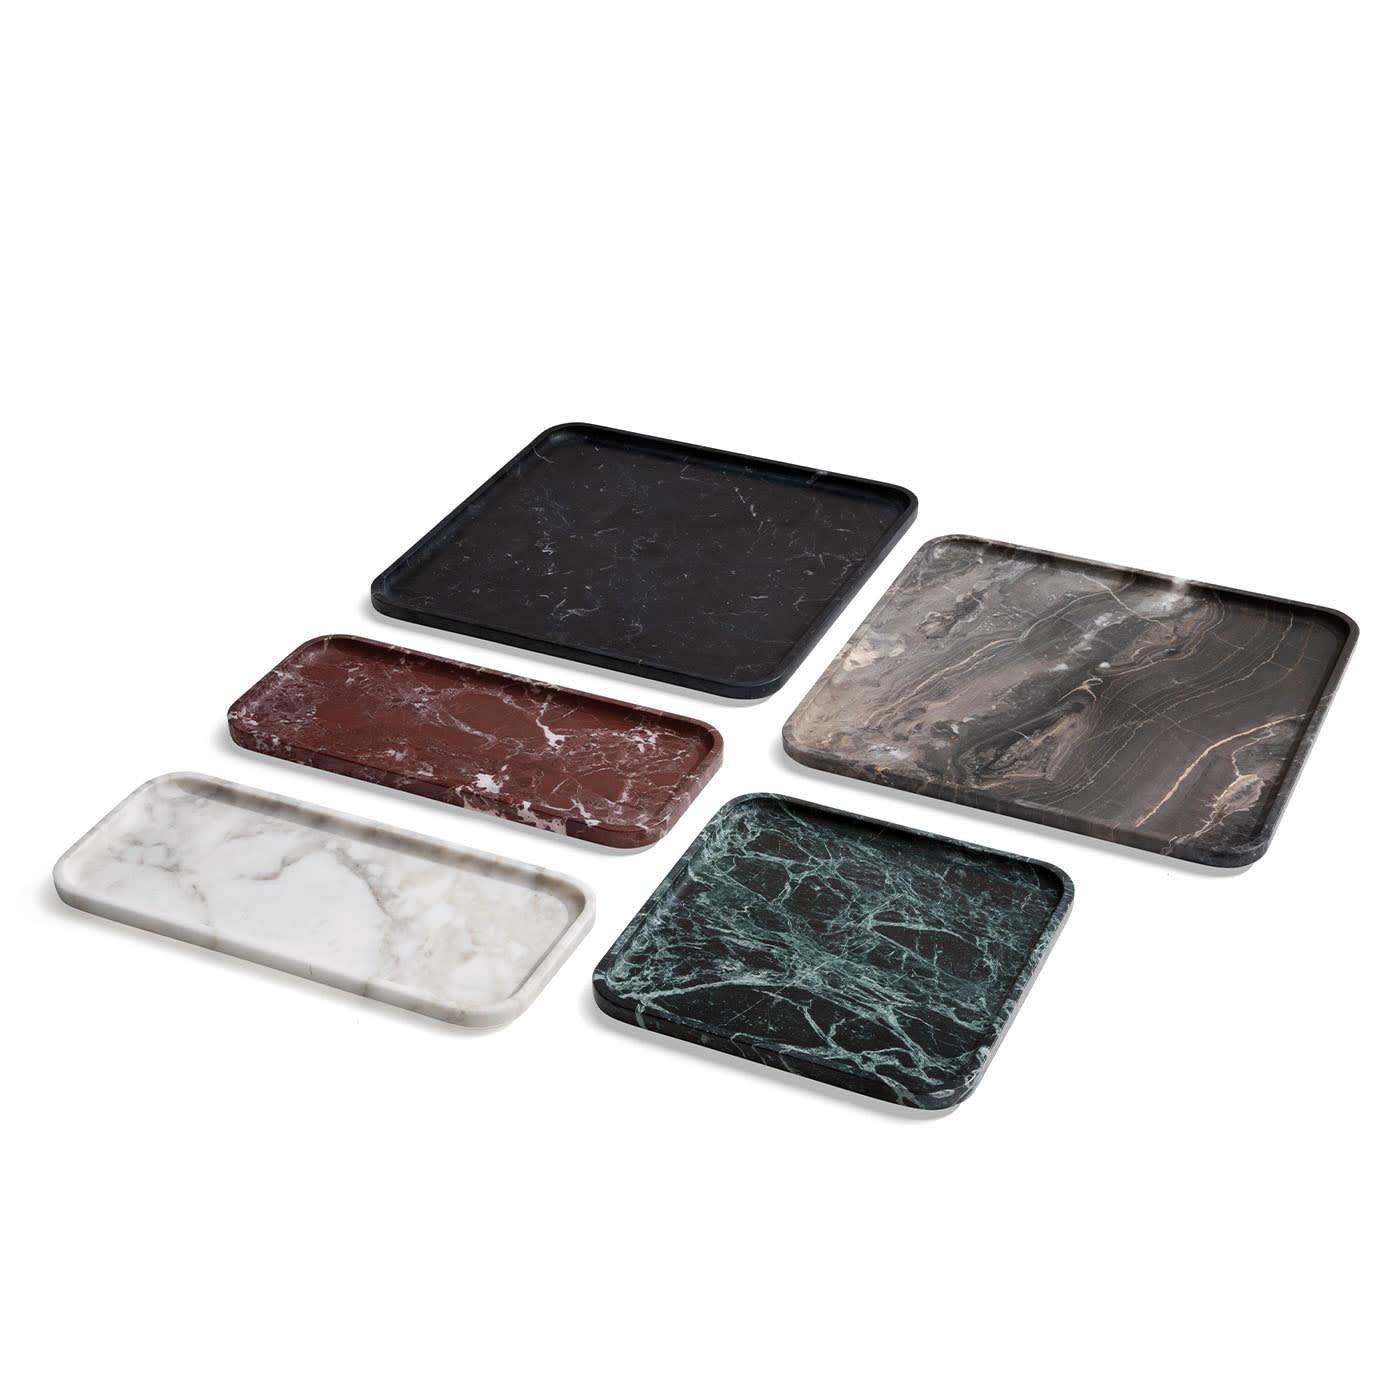 Discover this tray of a single red Lepanto marble with protruding edges useful for optimized grip. Boasting bright-white veins drawing contrasting traceries into the deep-red stone, each tray is entirely unique. Rounded edges soften its style.